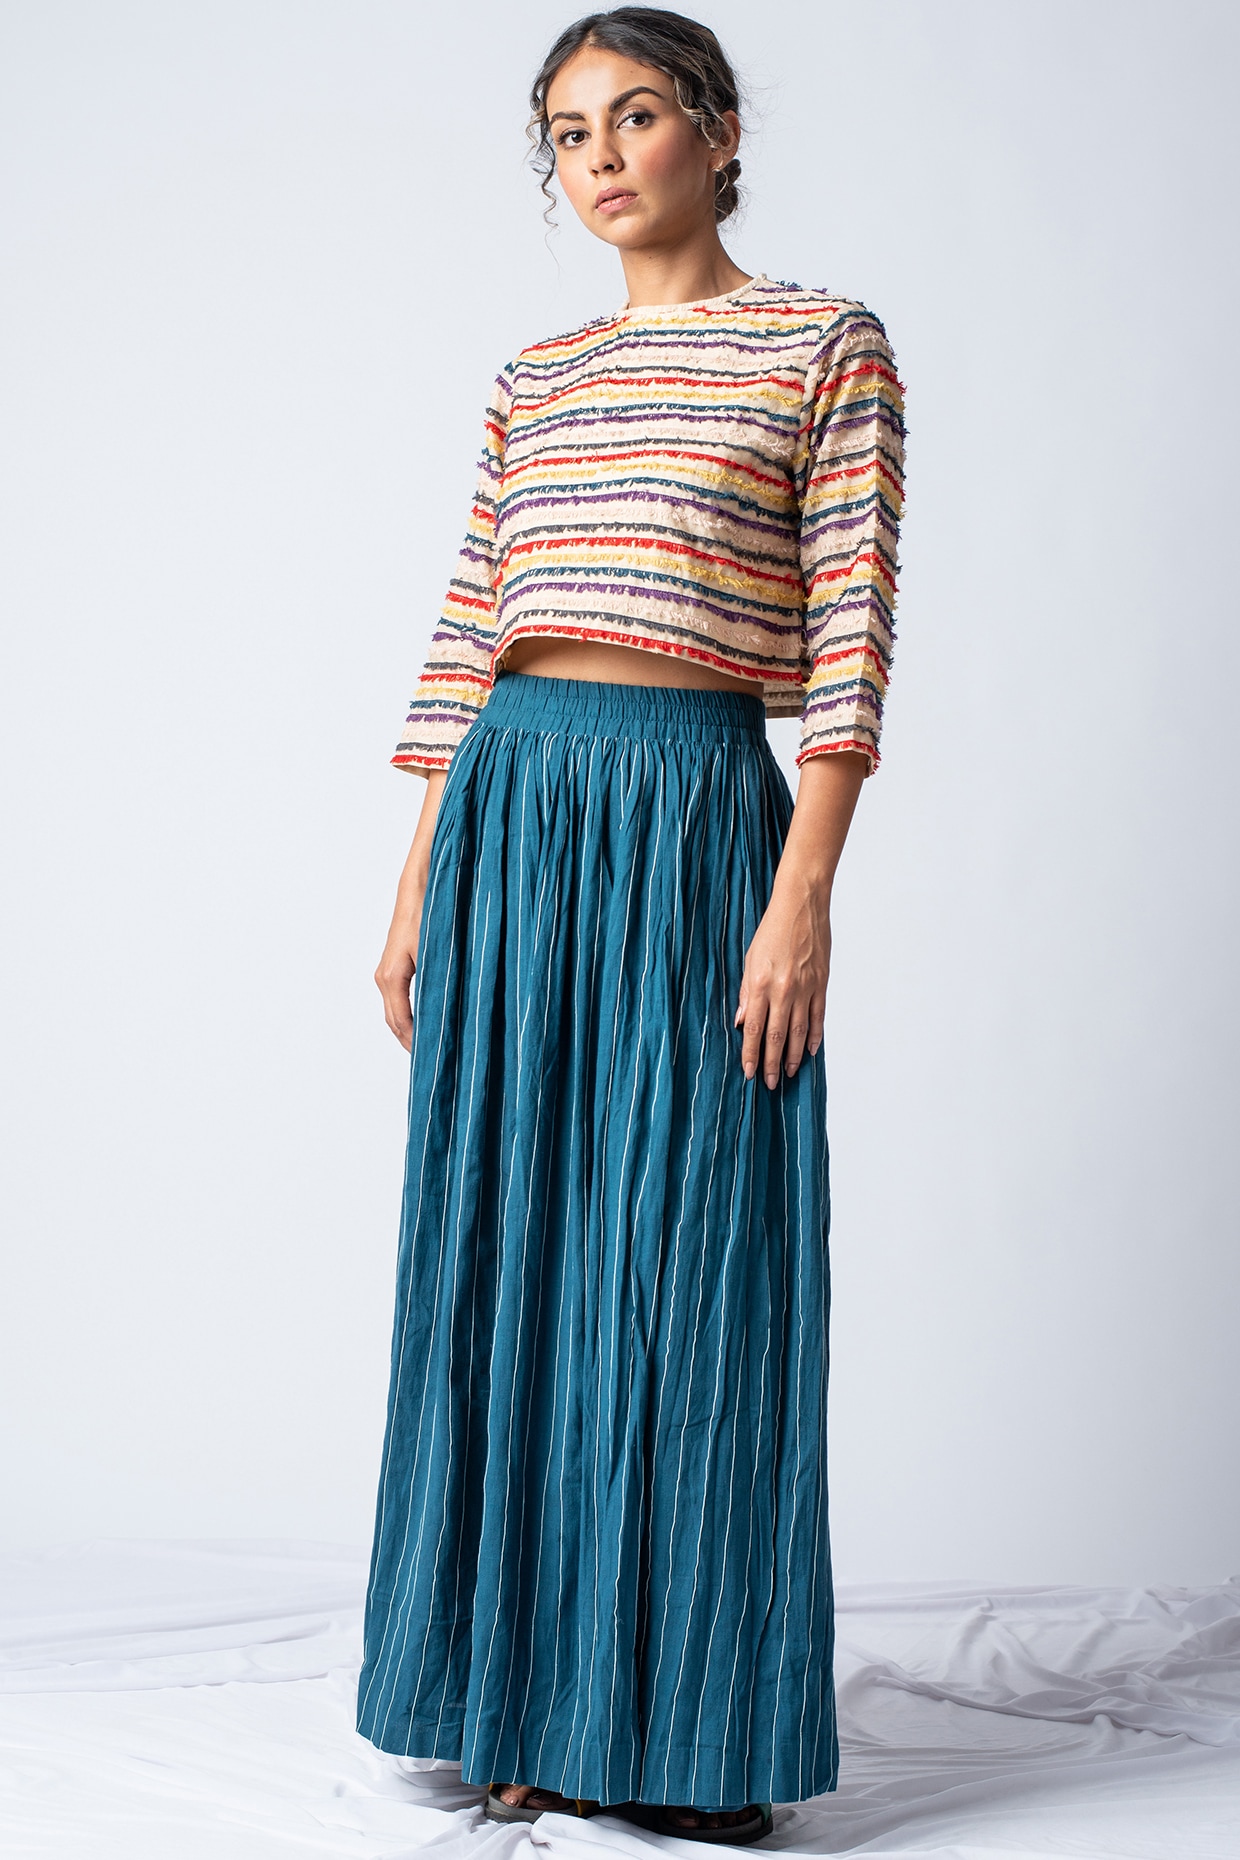 Teal Embroidered Striped Skirt Design 